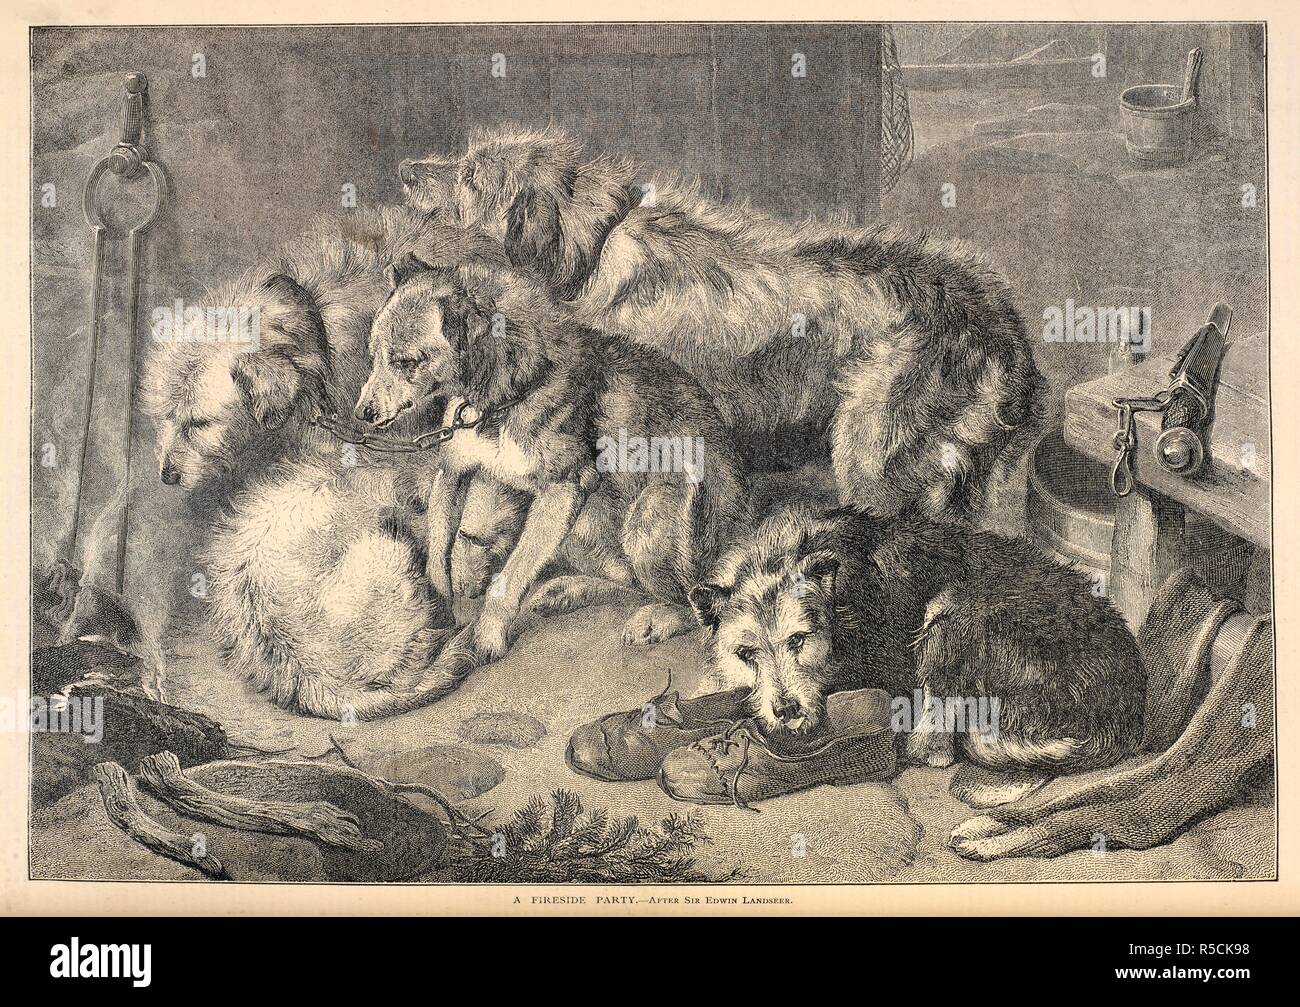 'A fireside party after Sir Edwin Landseer'. Some dogs together by a fireplace. Illustrated Sporting and Dramatic News. 18/12/1876. Source: Illustrated Sporting and Dramatic News. 18/12/1876 p.284. Stock Photo